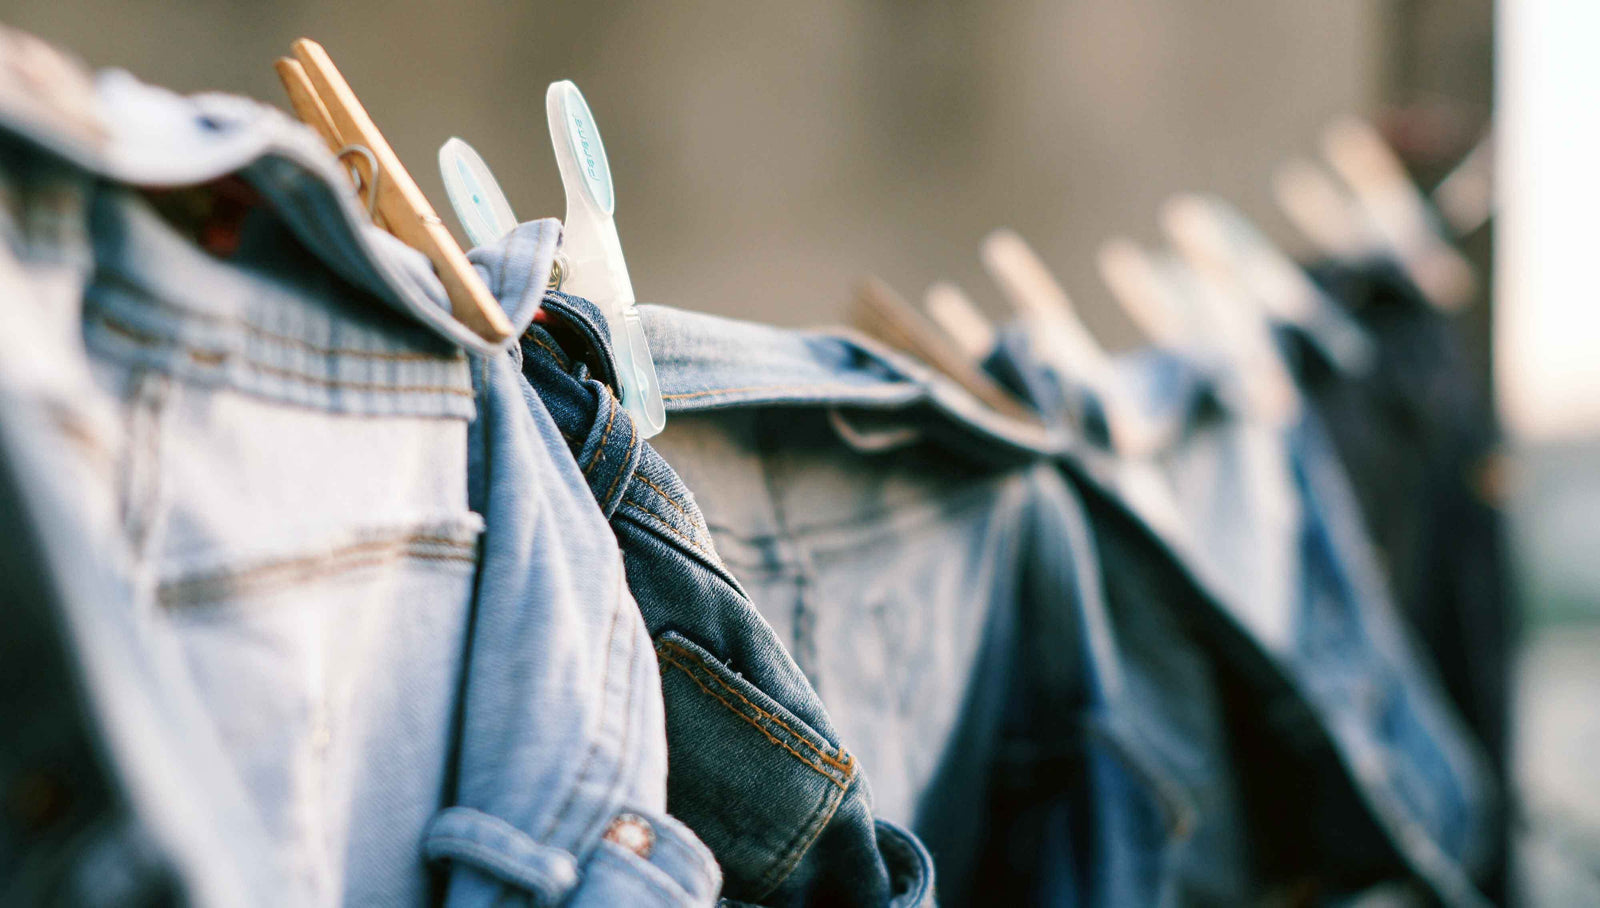 SAY GOODBYE TO CLOTHES MOTHS WITH THESE 4 NATURAL SOLUTIONS